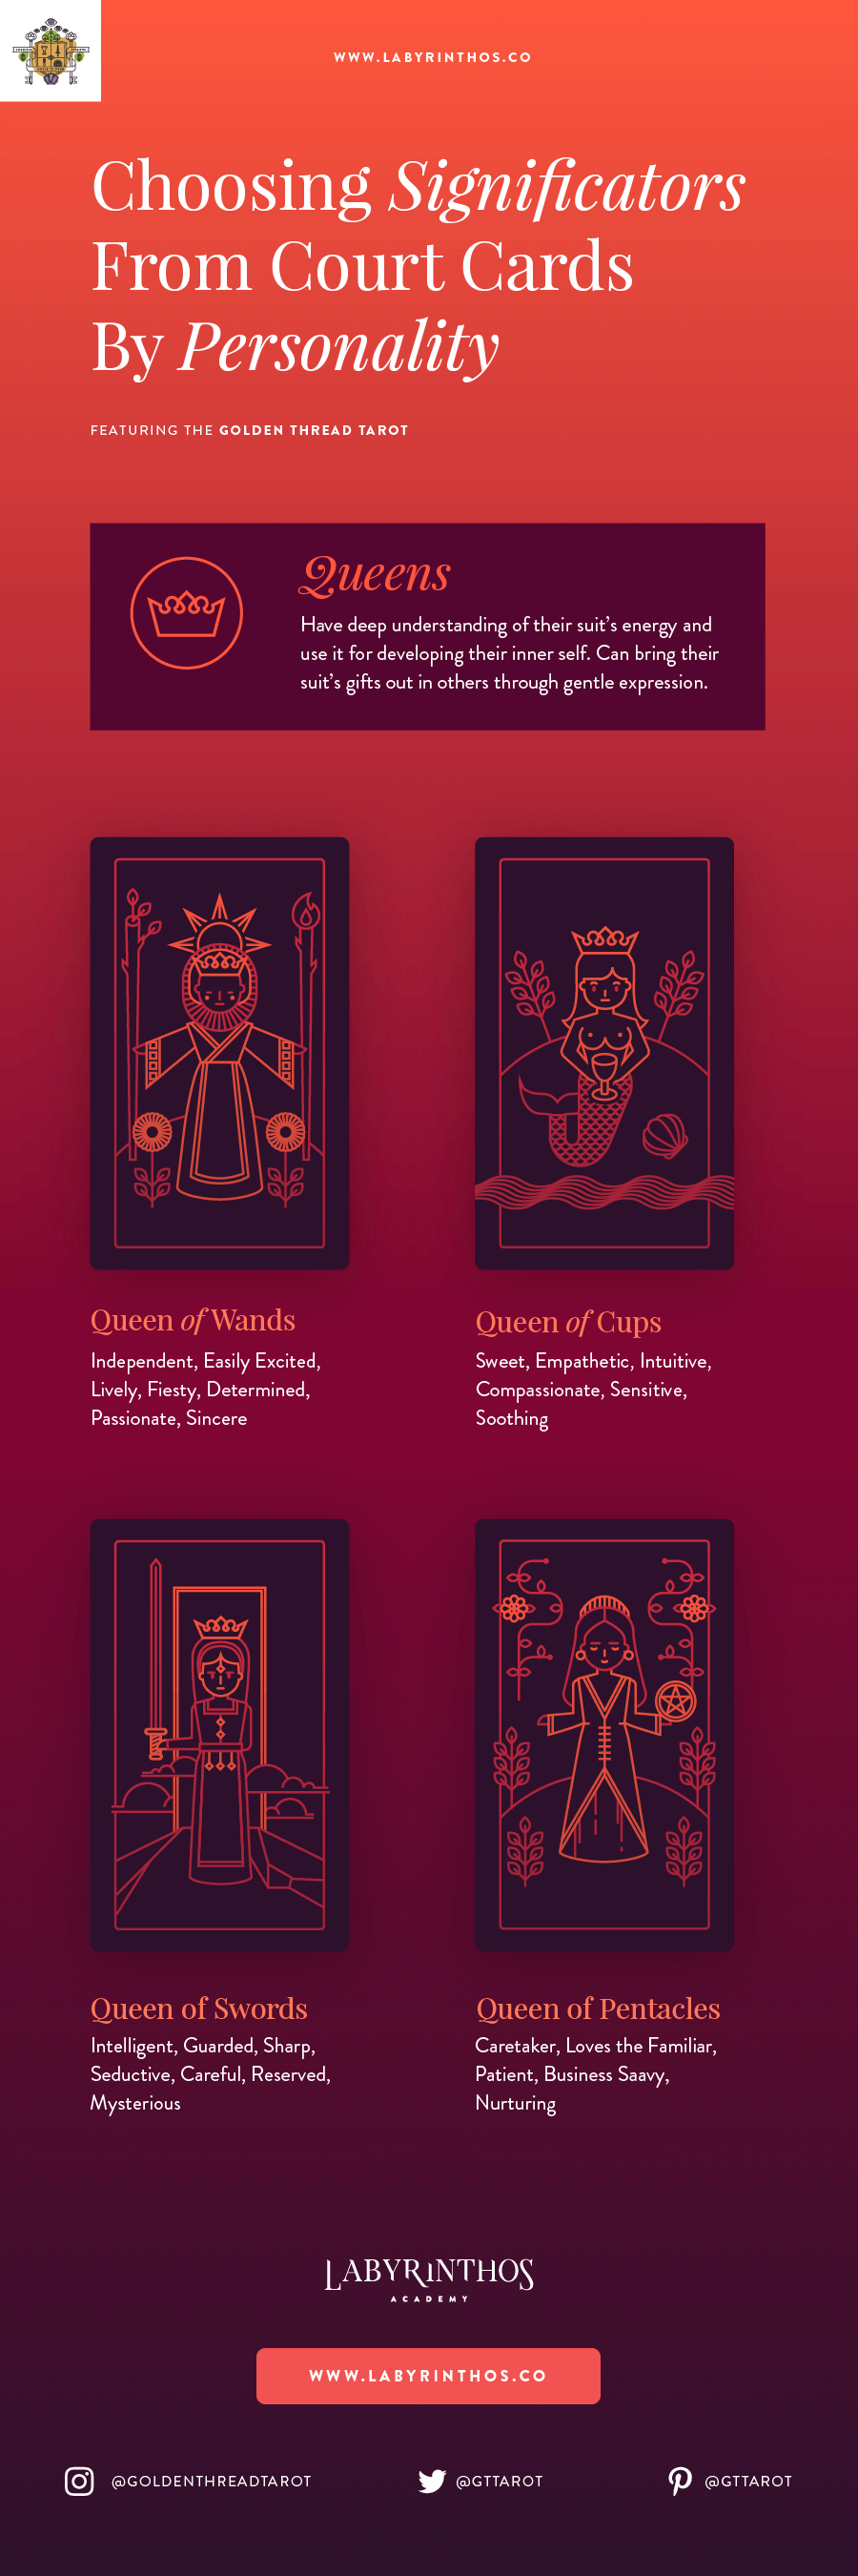 The Personalities of the Queens: Tarot Court Cards as Significators in Tarot